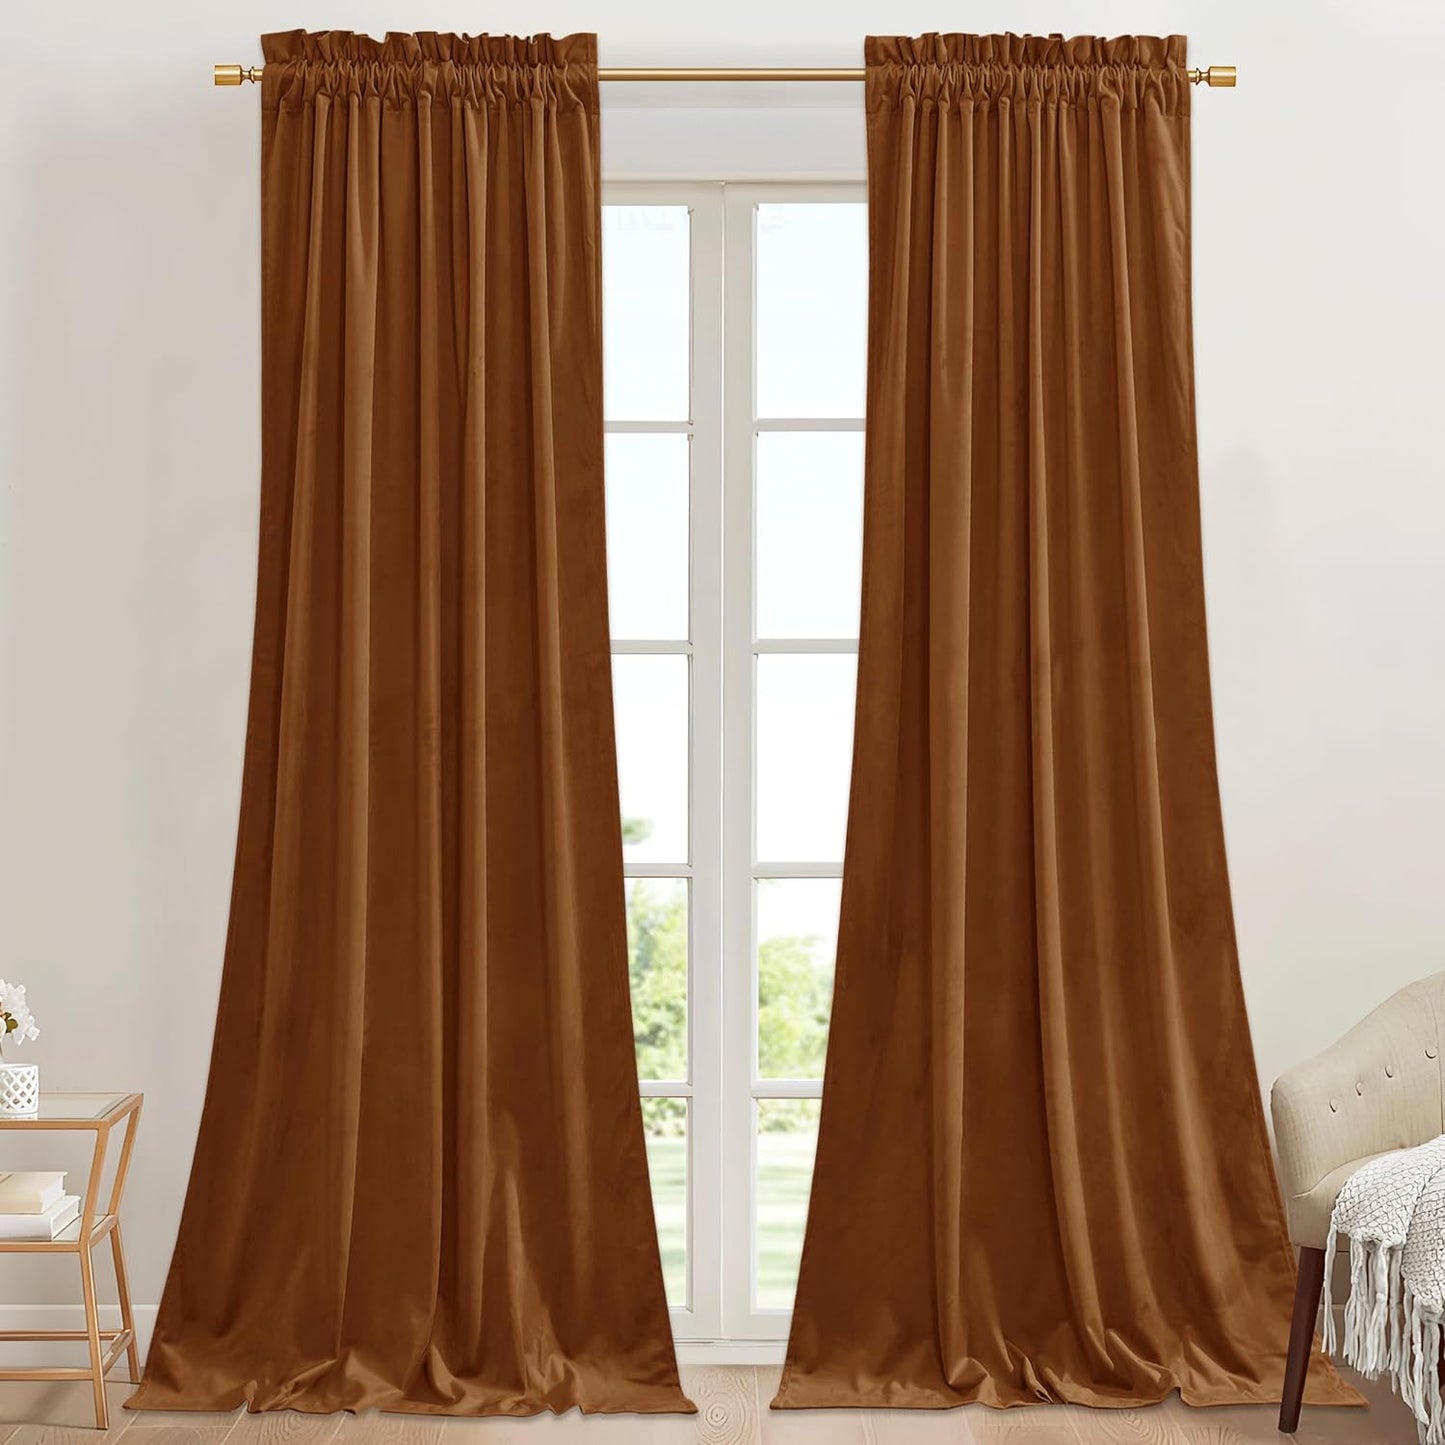 Stangh Theater Red Velvet Curtains - Super Soft Velvet Blackout Insulated Curtain Panels 84 Inches Length for Living Room Holiday Decorative Drapes for Master Bedroom, W52 X L84, 2 Panels  StangH Burnt Orange W42" X L84" 